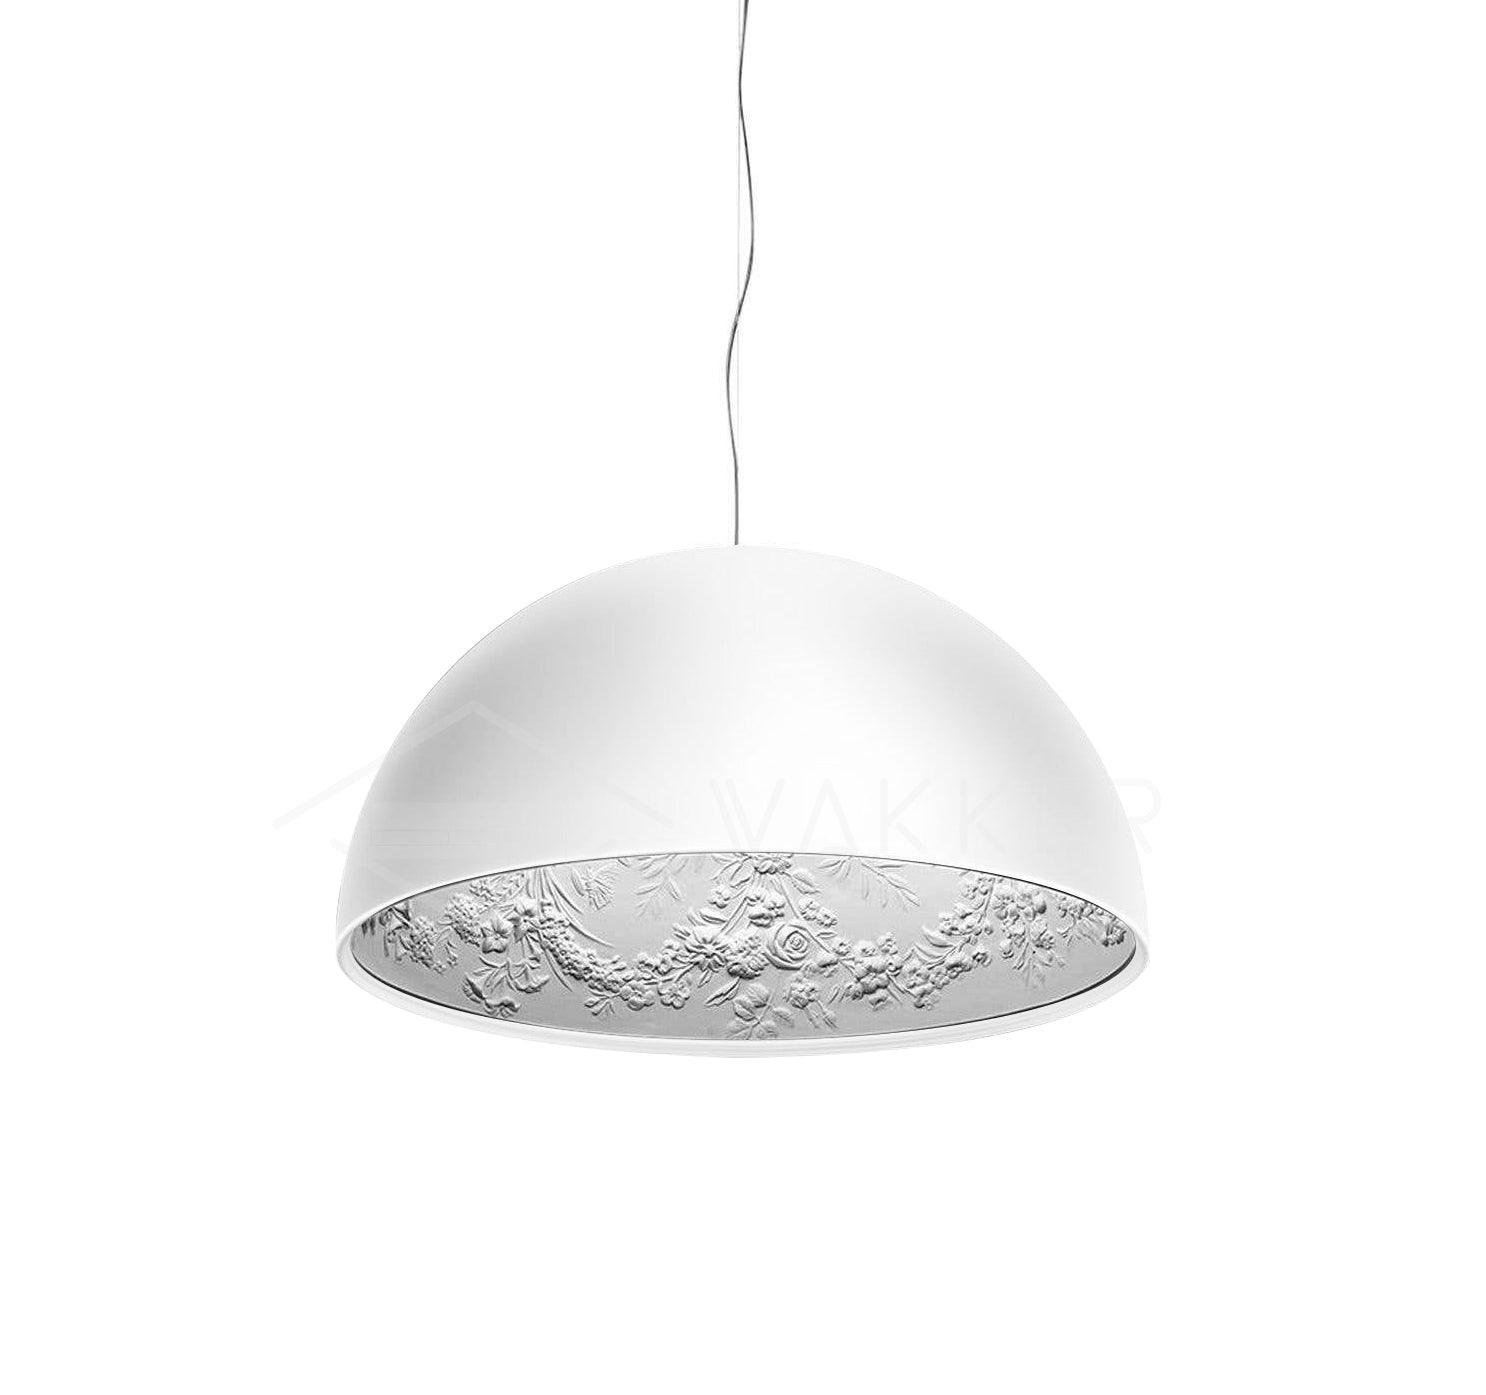 Matte White Sky Garden Pendant Light - Diameter 23.6 inches and Height 11.8 inches (60cm x 30cm)